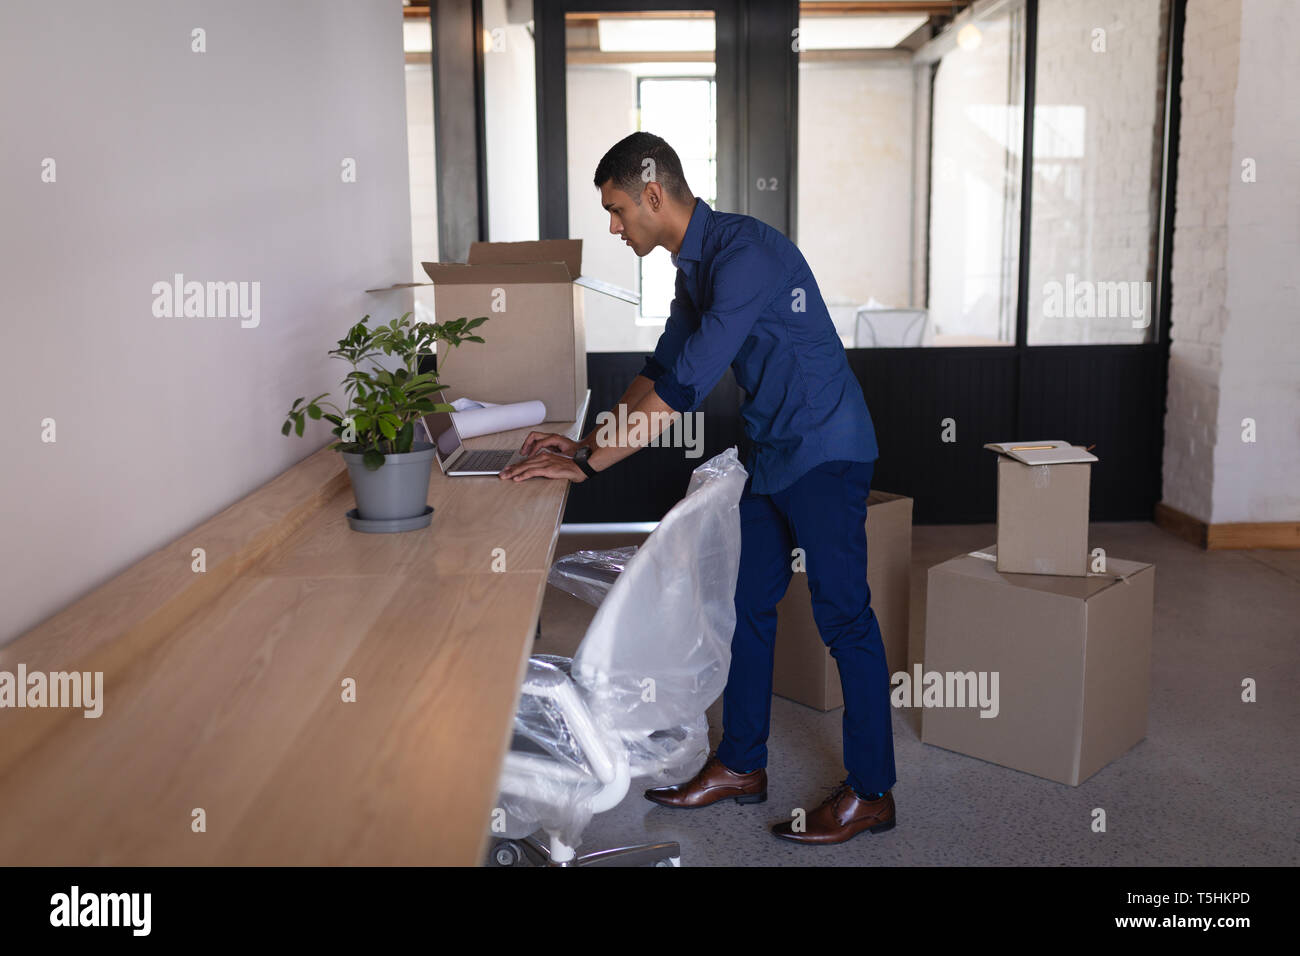 Businessman using laptop at desk in new office Stock Photo